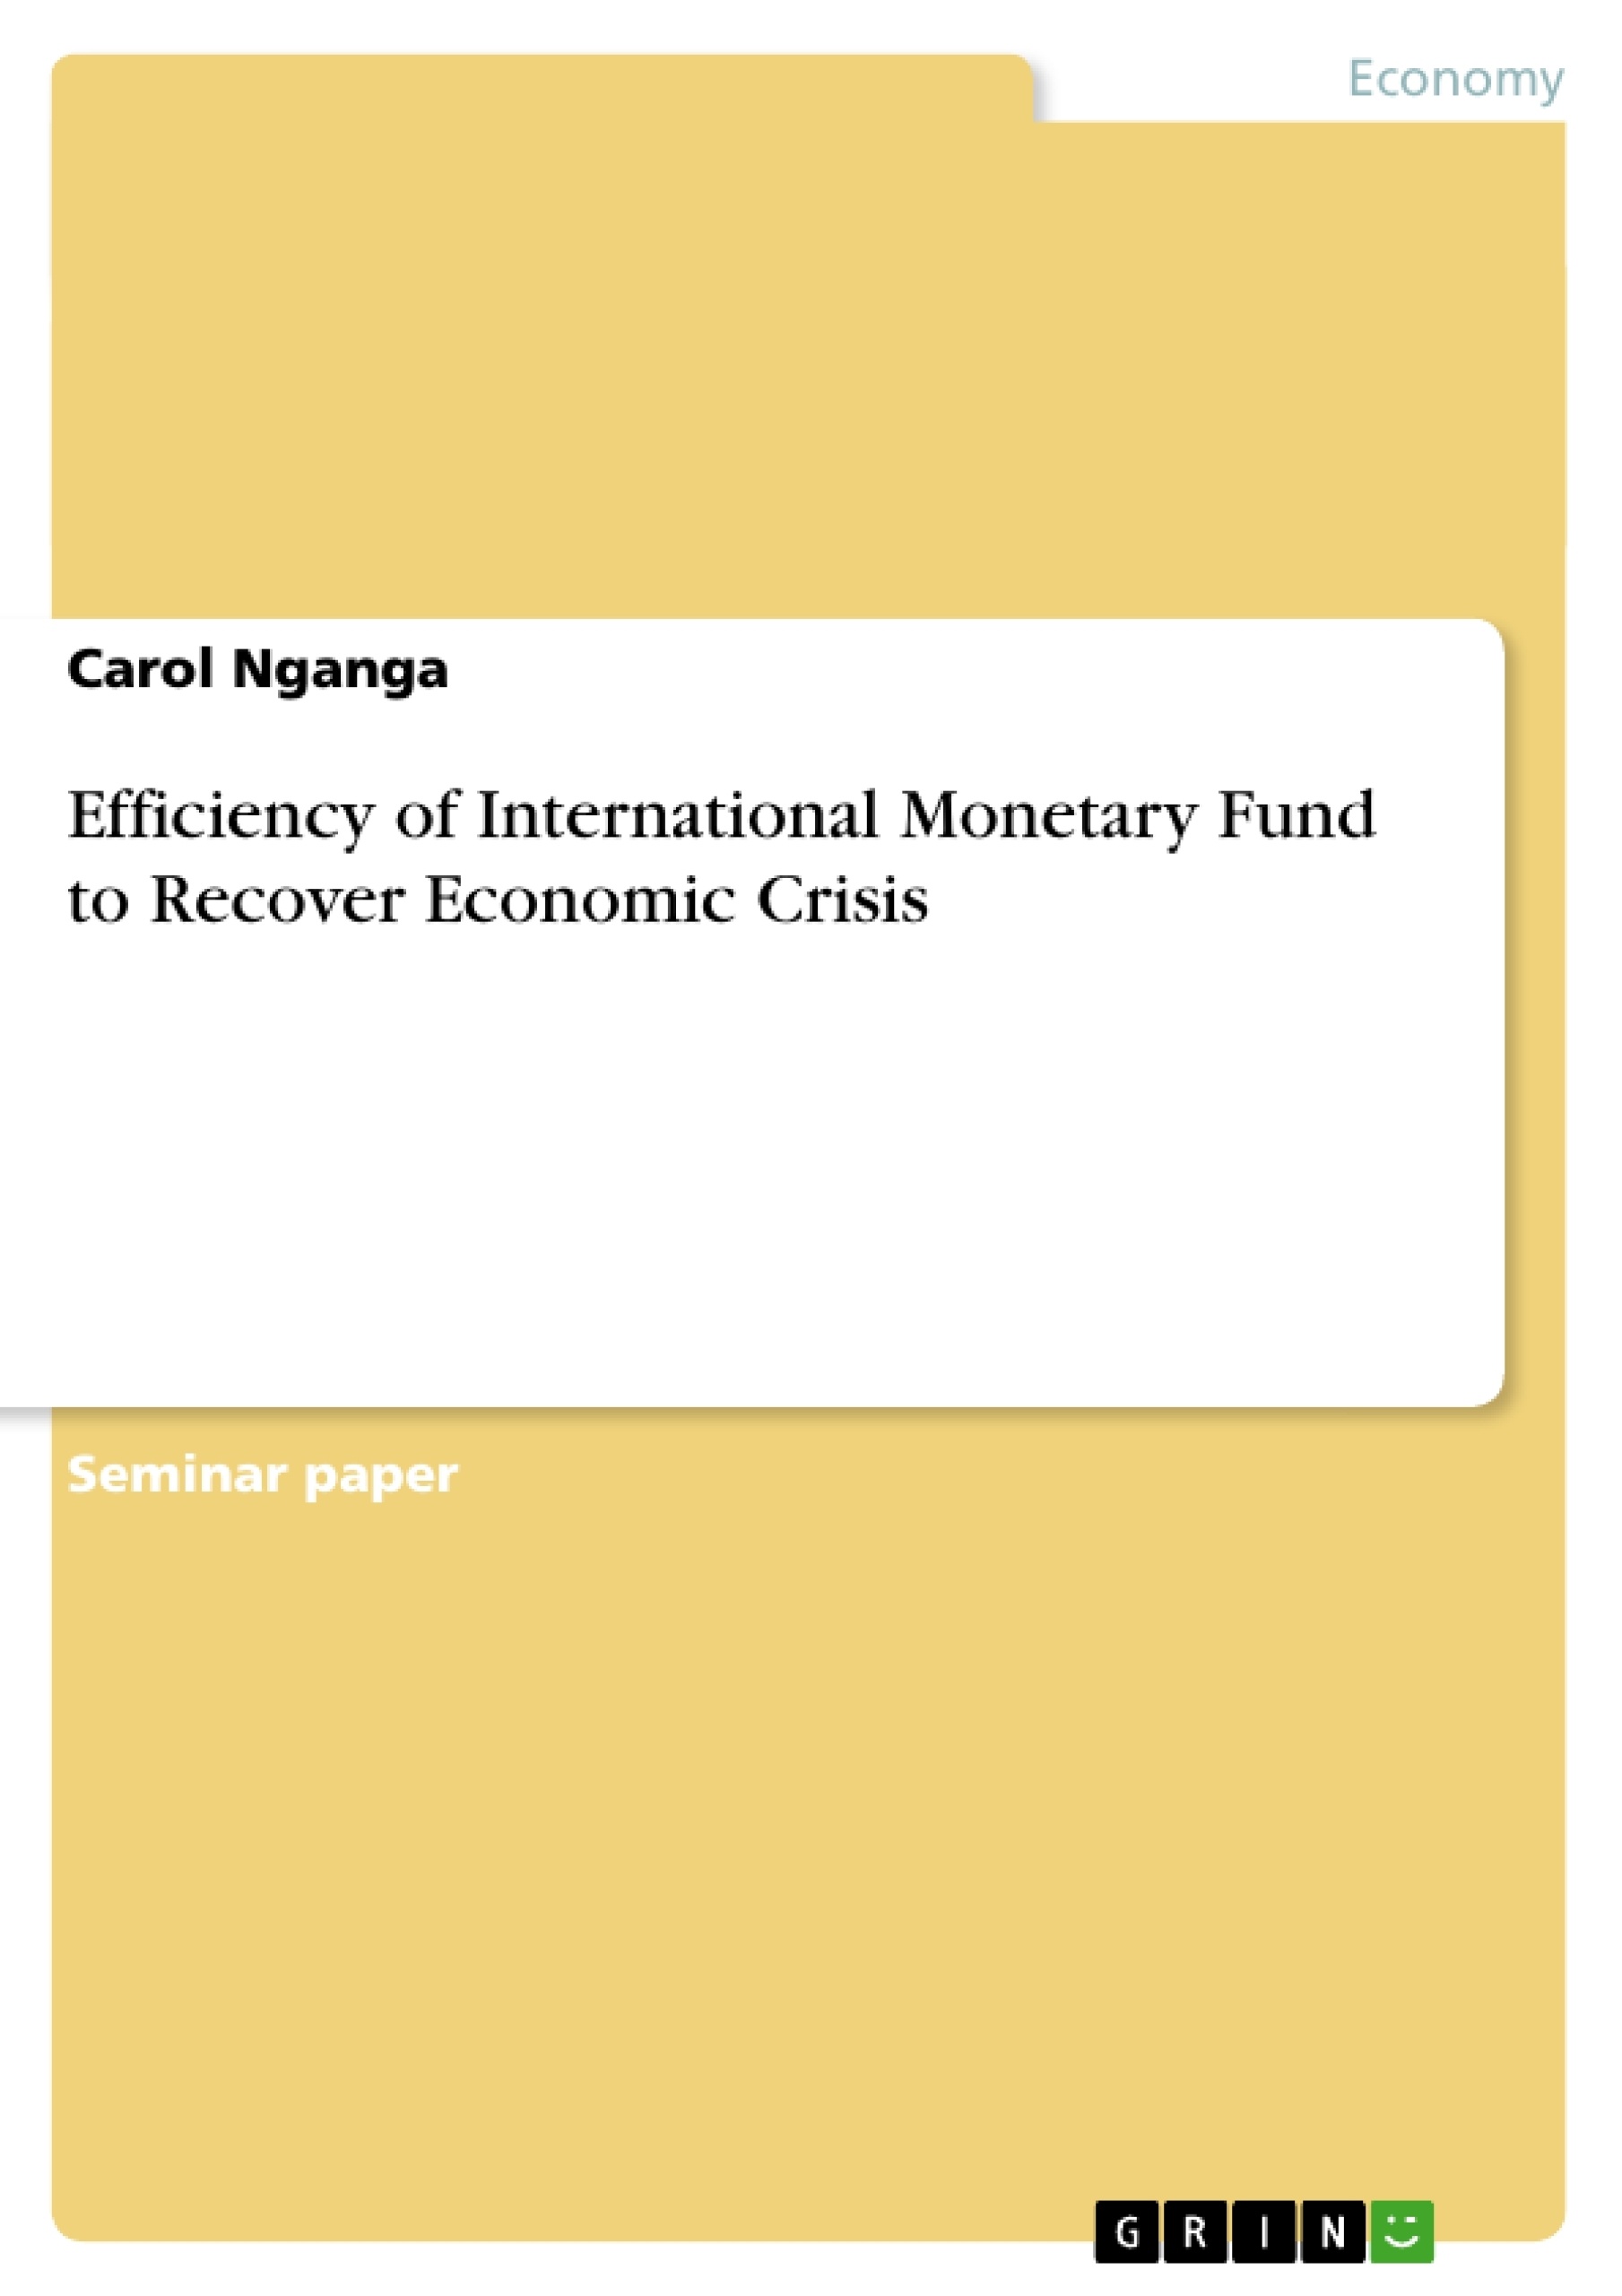 Titre: Efficiency of International Monetary Fund to Recover Economic Crisis